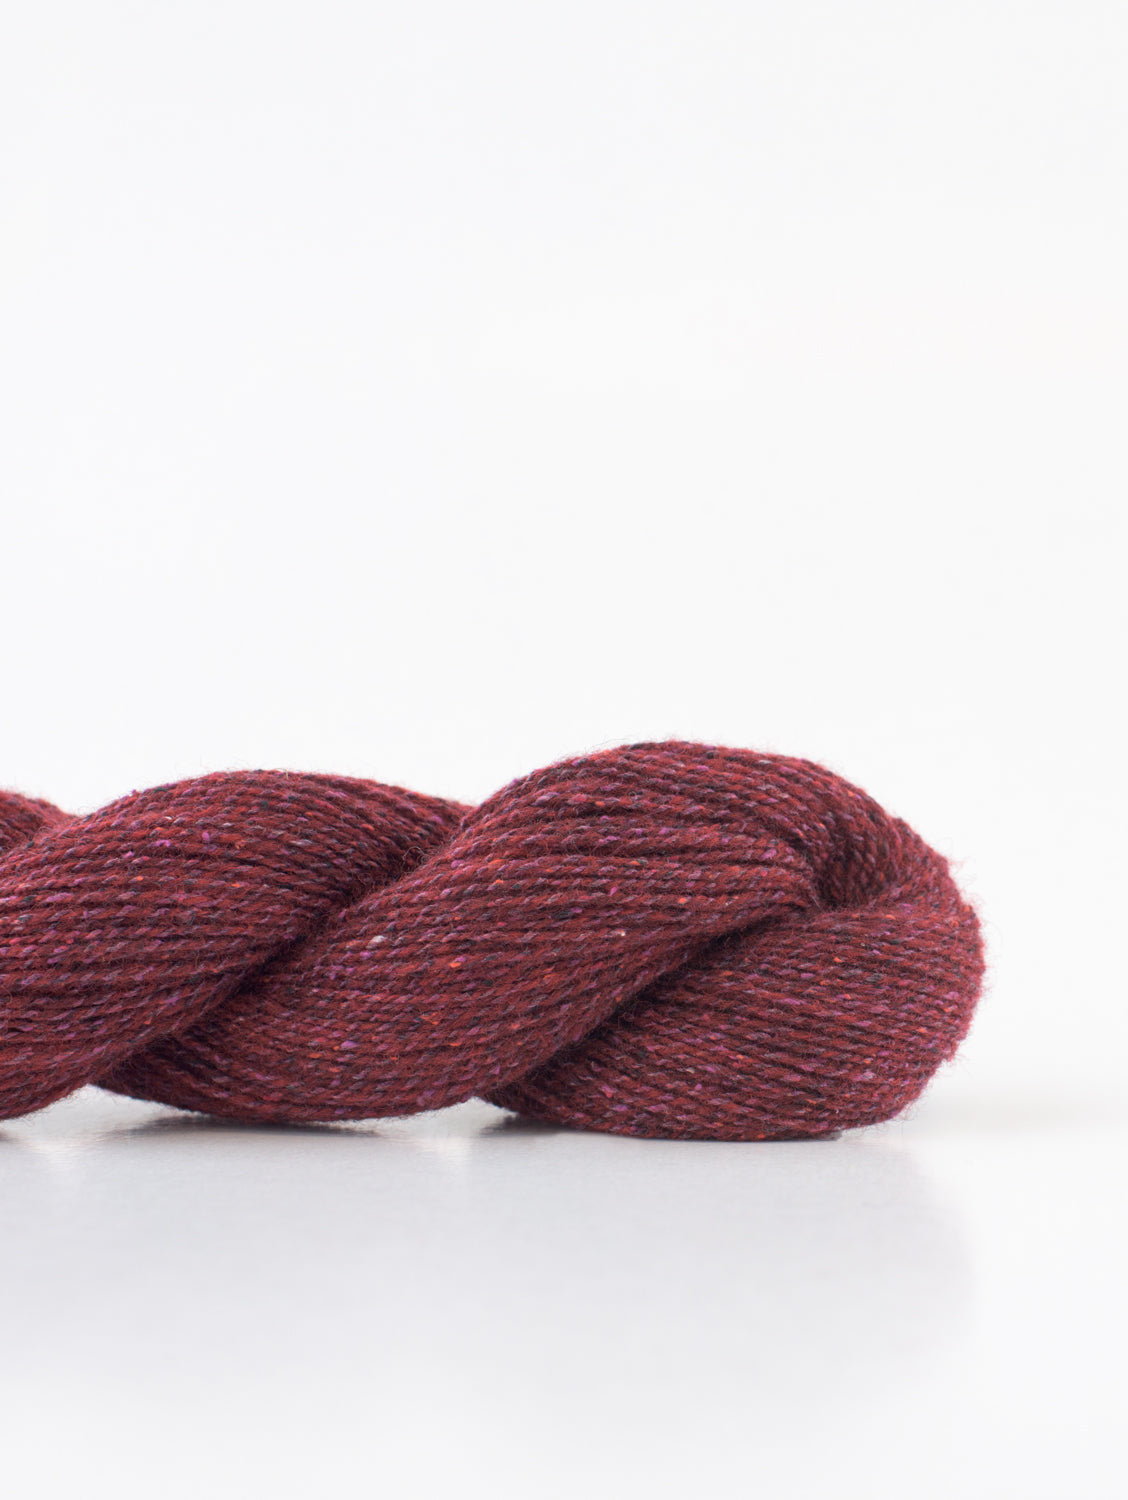 Tosh Pebble Mill Dyed - Light Fingering